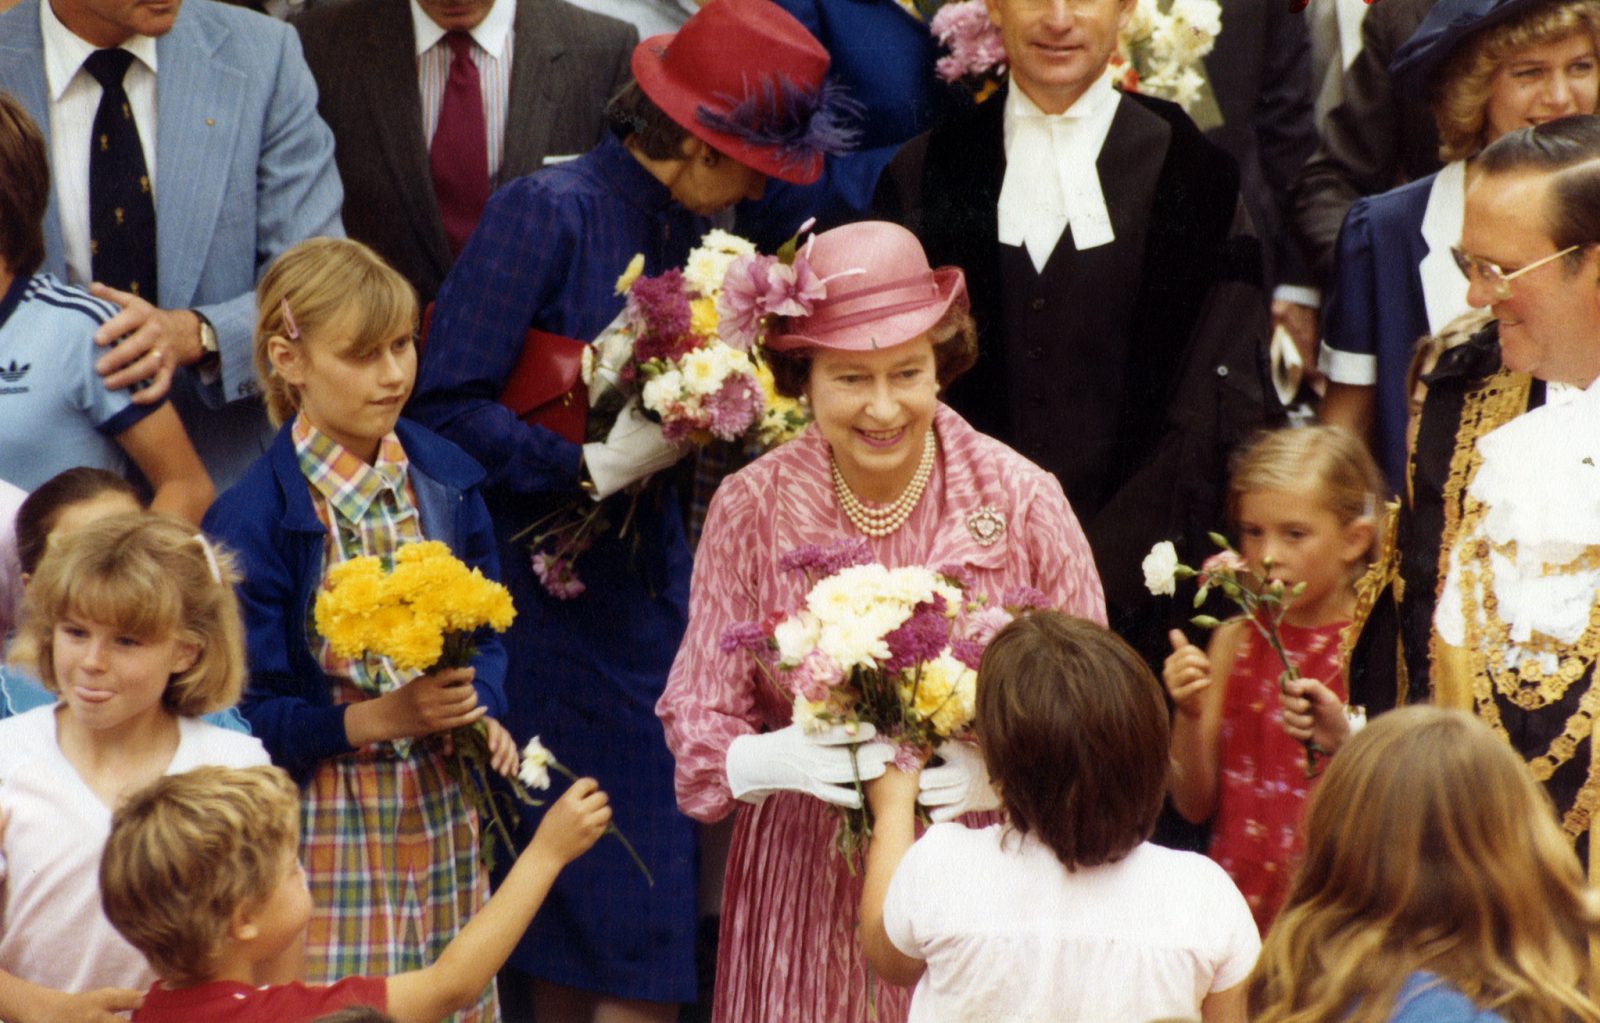 A photo of the Queen from Queensland State Archives